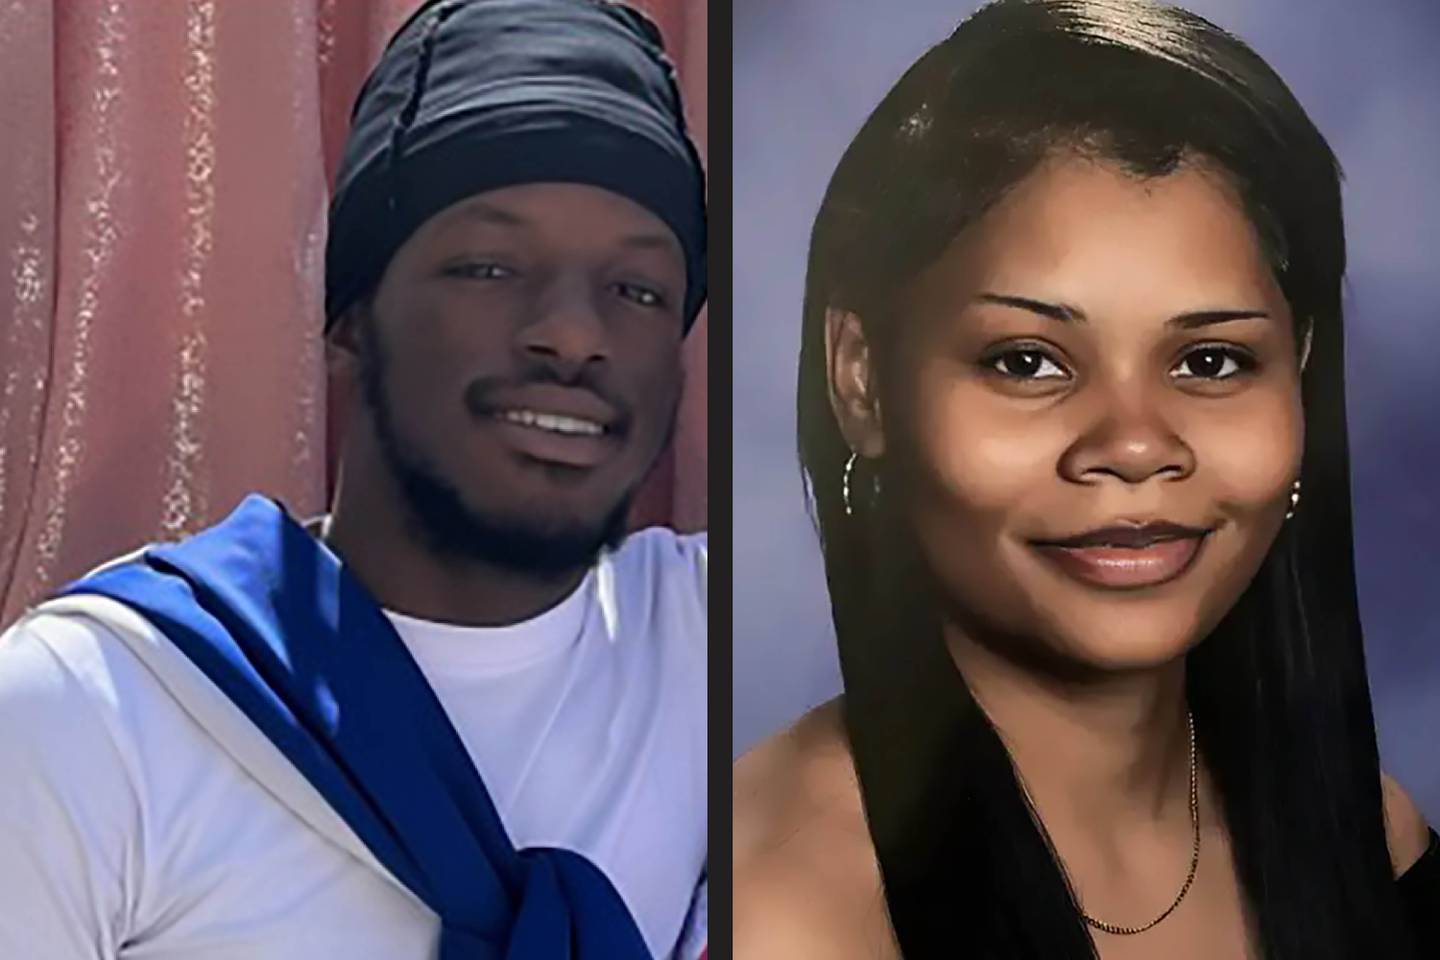 Photos of Kylis Fagbemi, 20, and Aaliyah Gonzalez, 18 who were killed in the mass shooting in Brooklyn over the weekend.